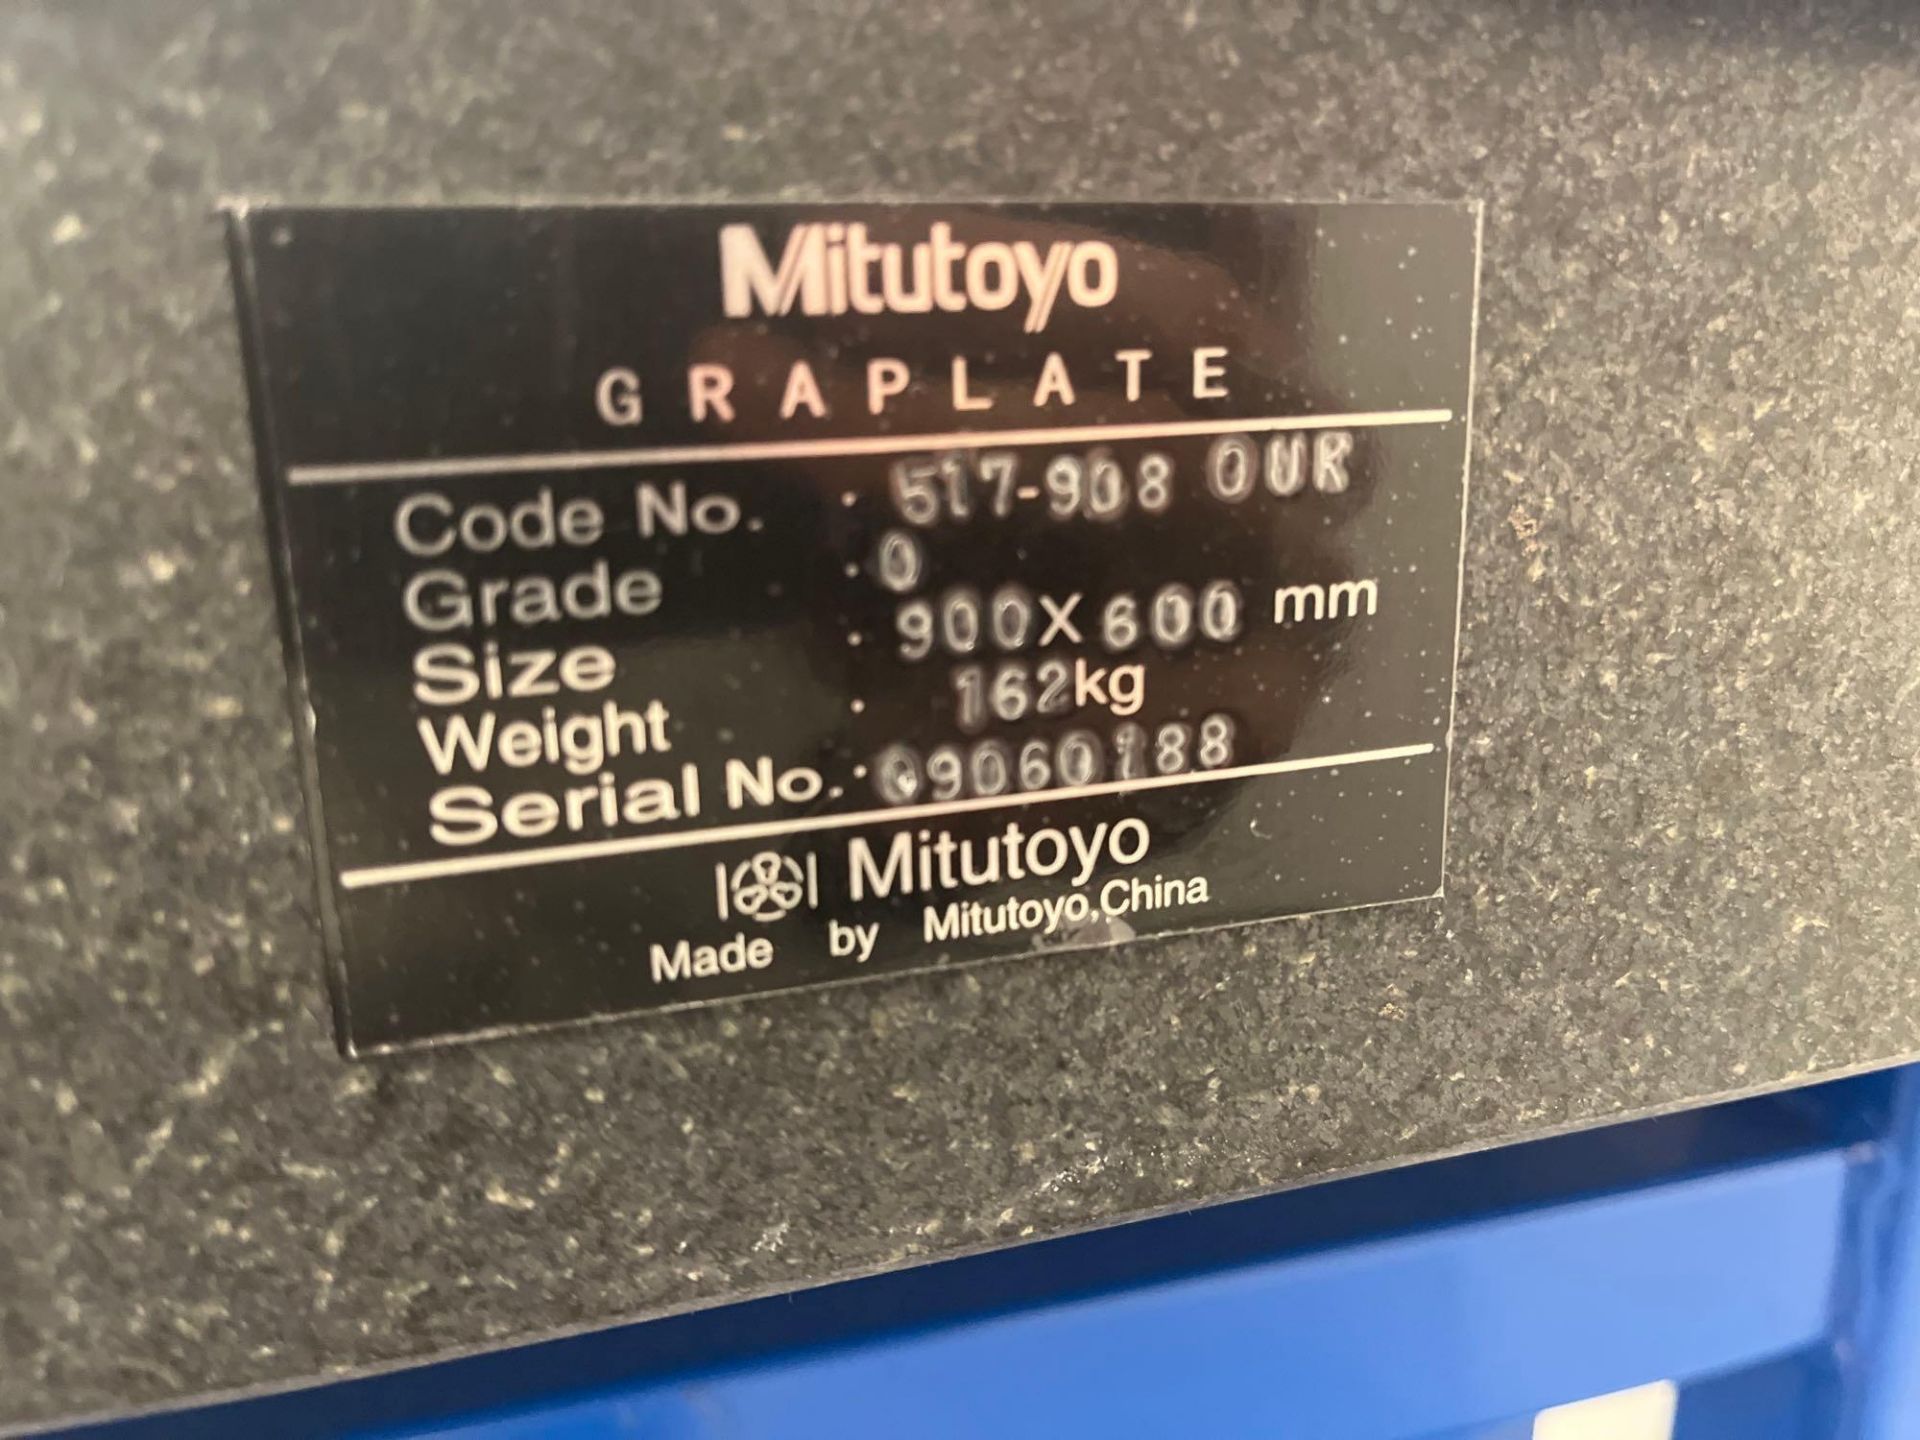 Mitutoyo Graplate workbench (900mm x 600mm, 162kg) - Image 3 of 4